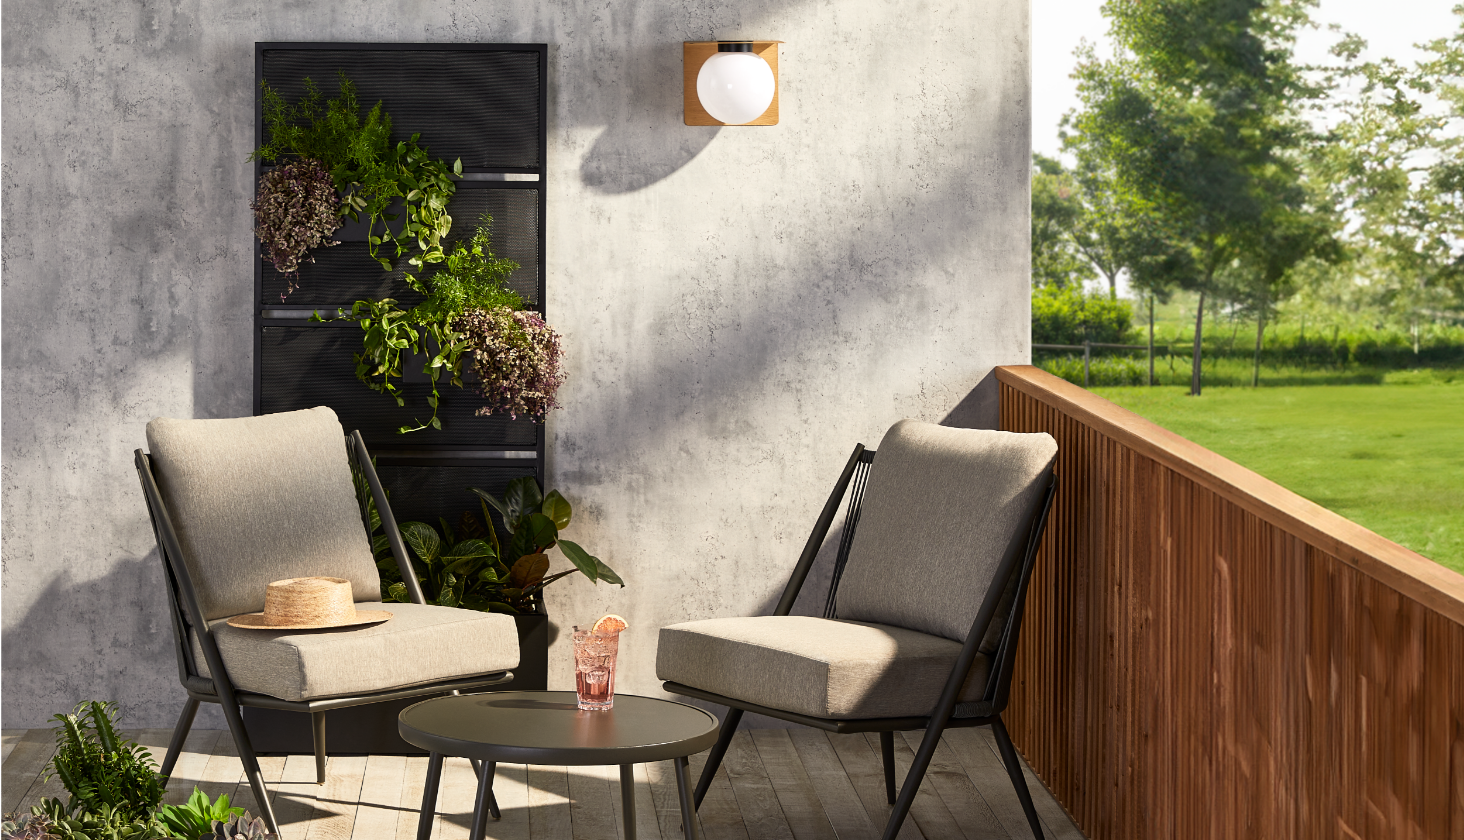 A CANVAS Mercier Privacy Screen planter, 3-pc Nero Chat Set and a NOMA Wall Mounted Light on a patio.